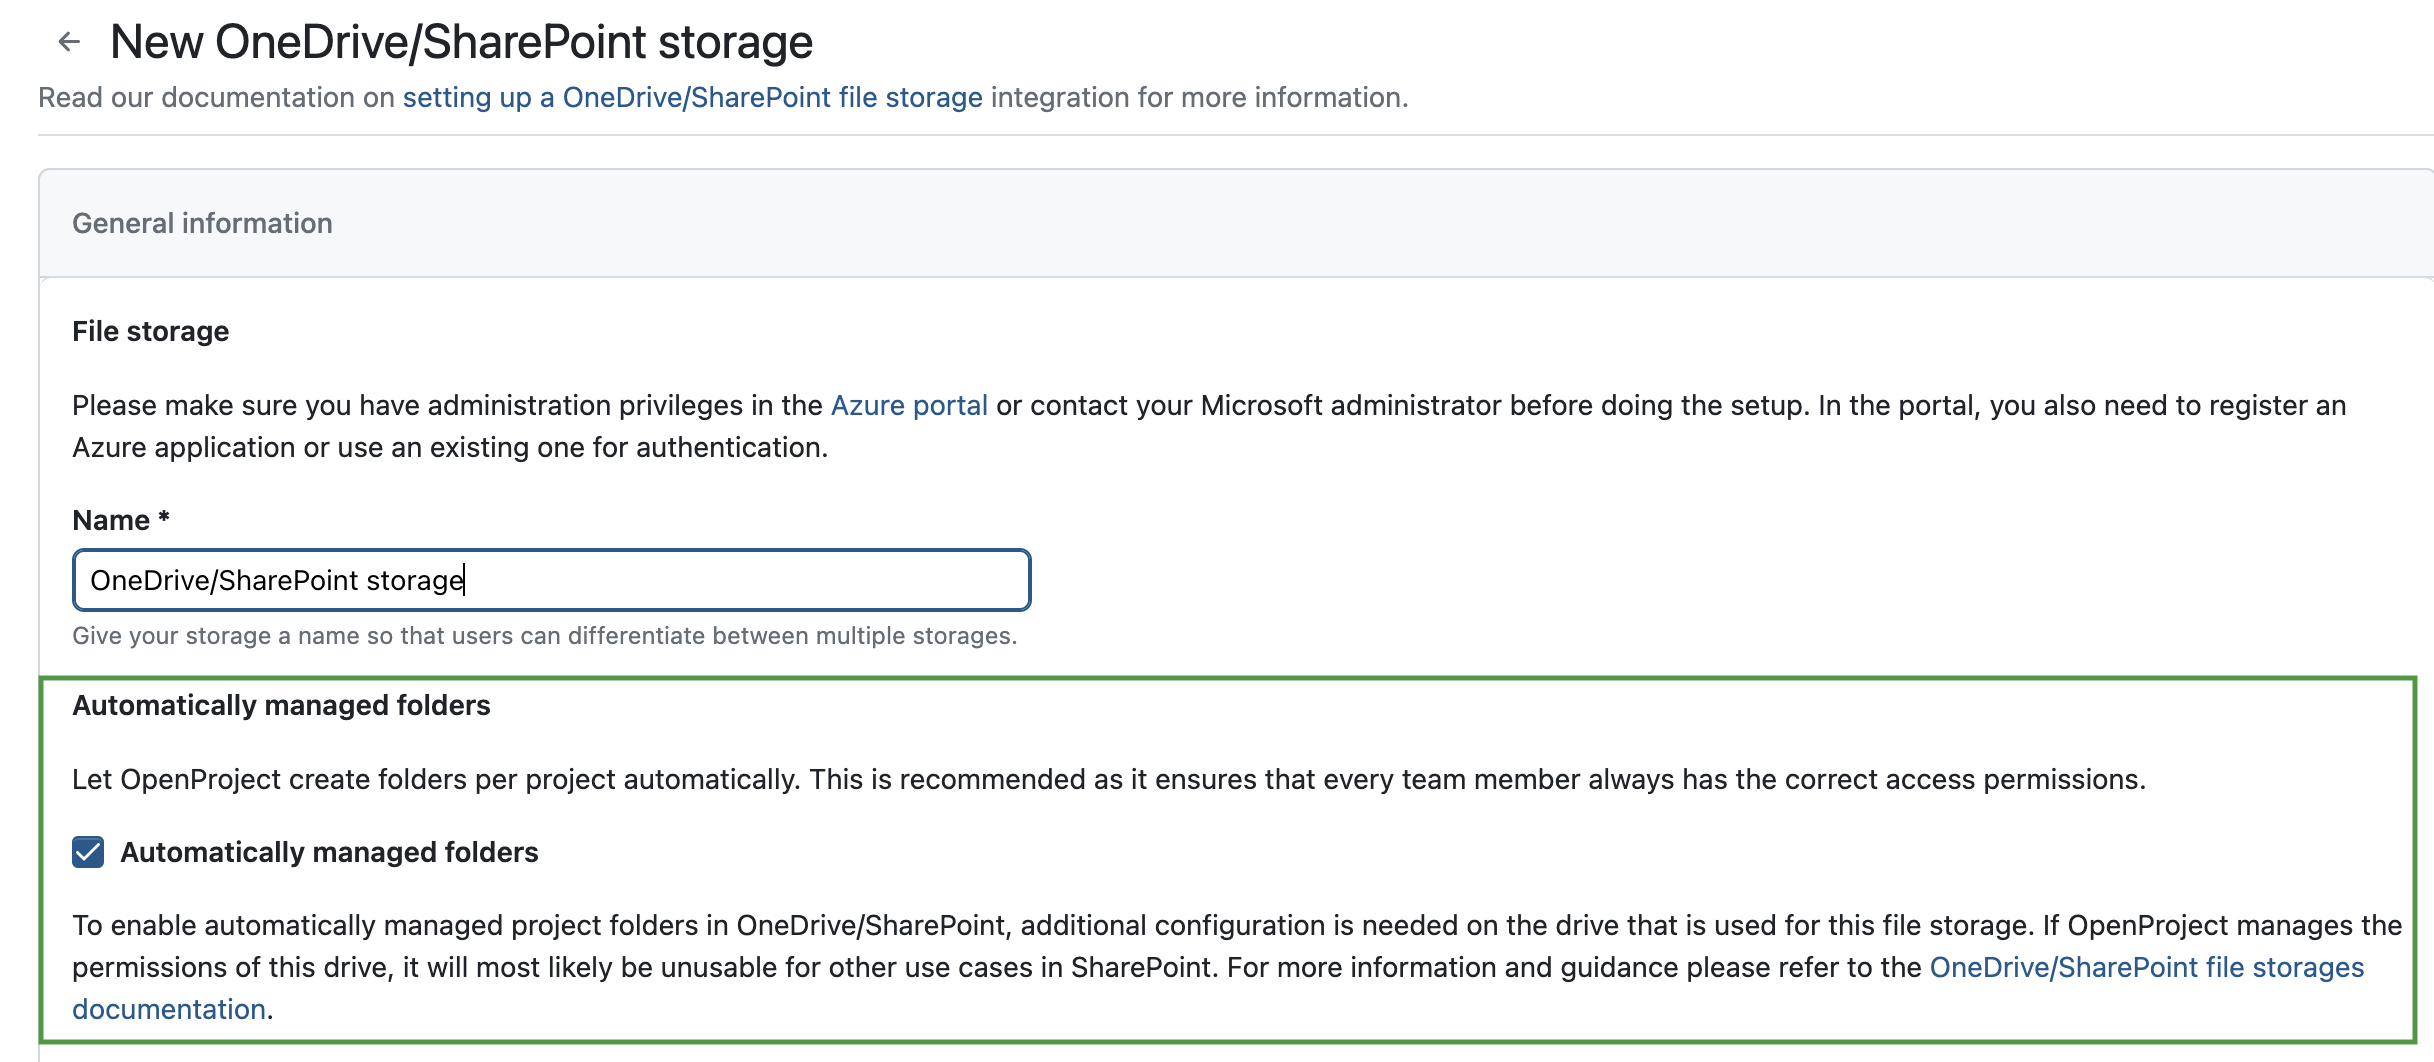 Project folders for OneDrive/SharePoint with automatically managed permissions